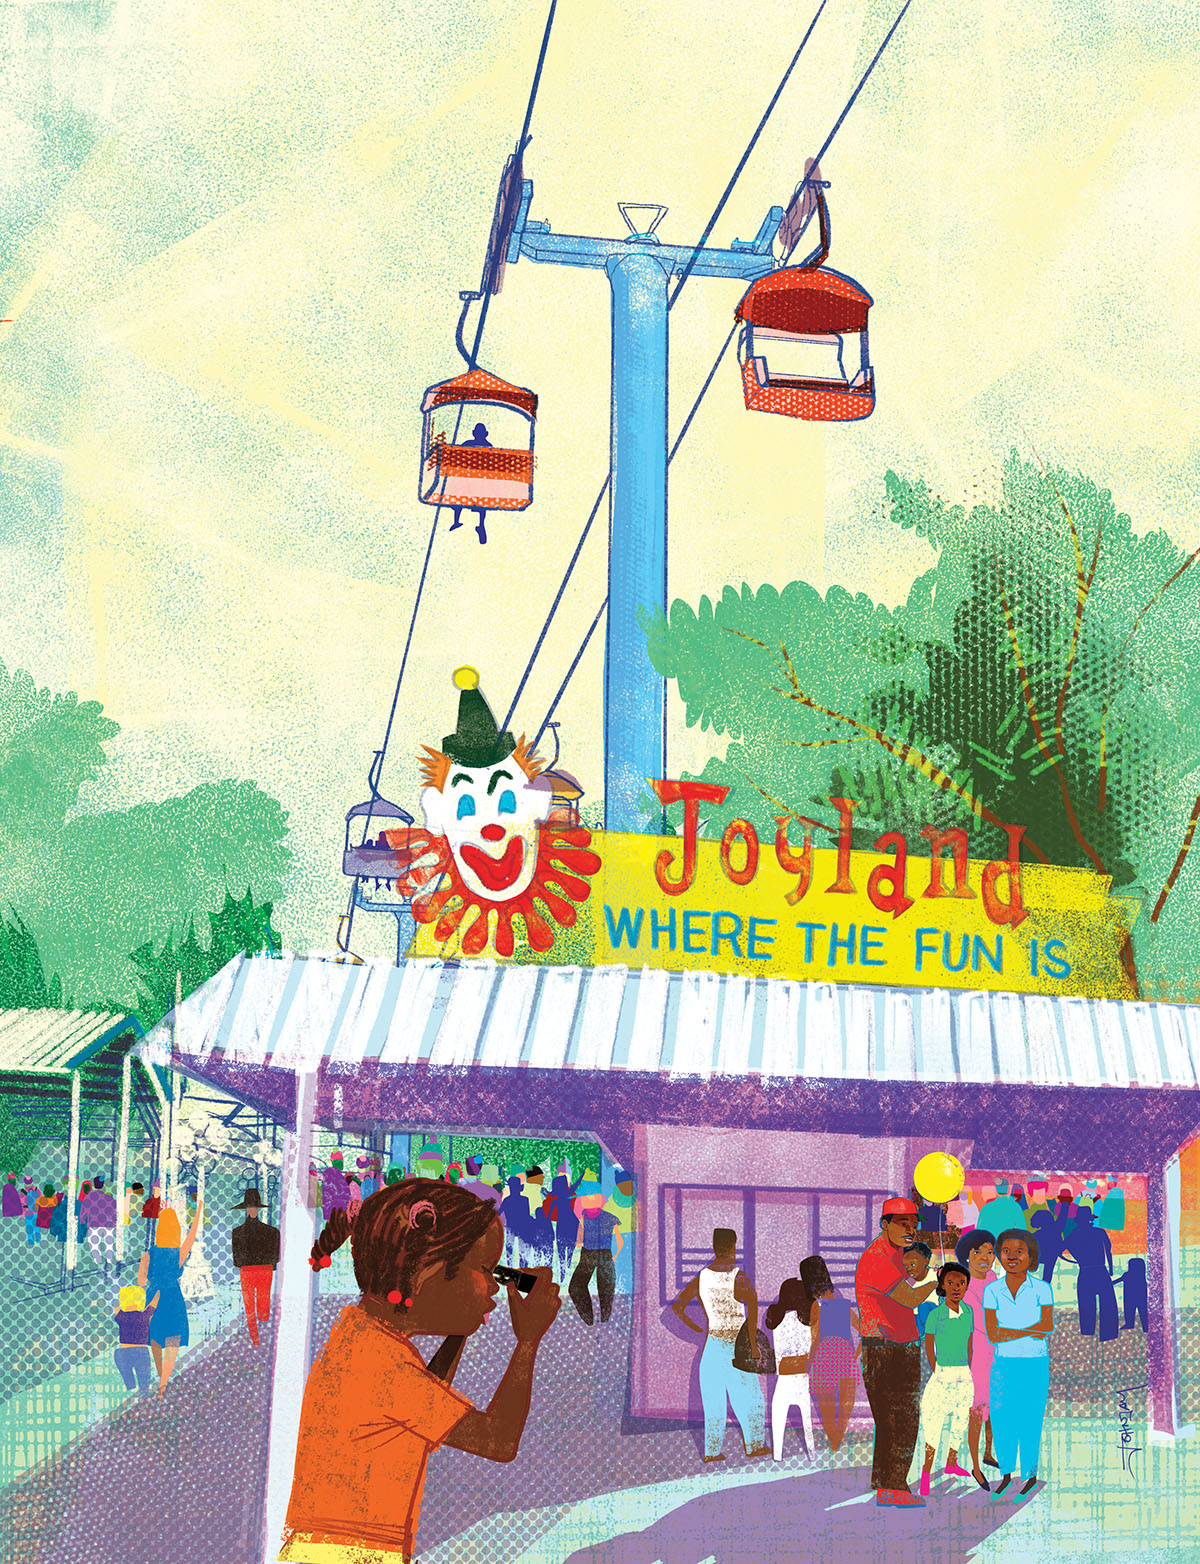 An illustration of a young woman looking at a group of people through glasses. The background scene is a busy amusement park, including a yellow sign reading "Joyland Where The Fun Is" and a red gondola